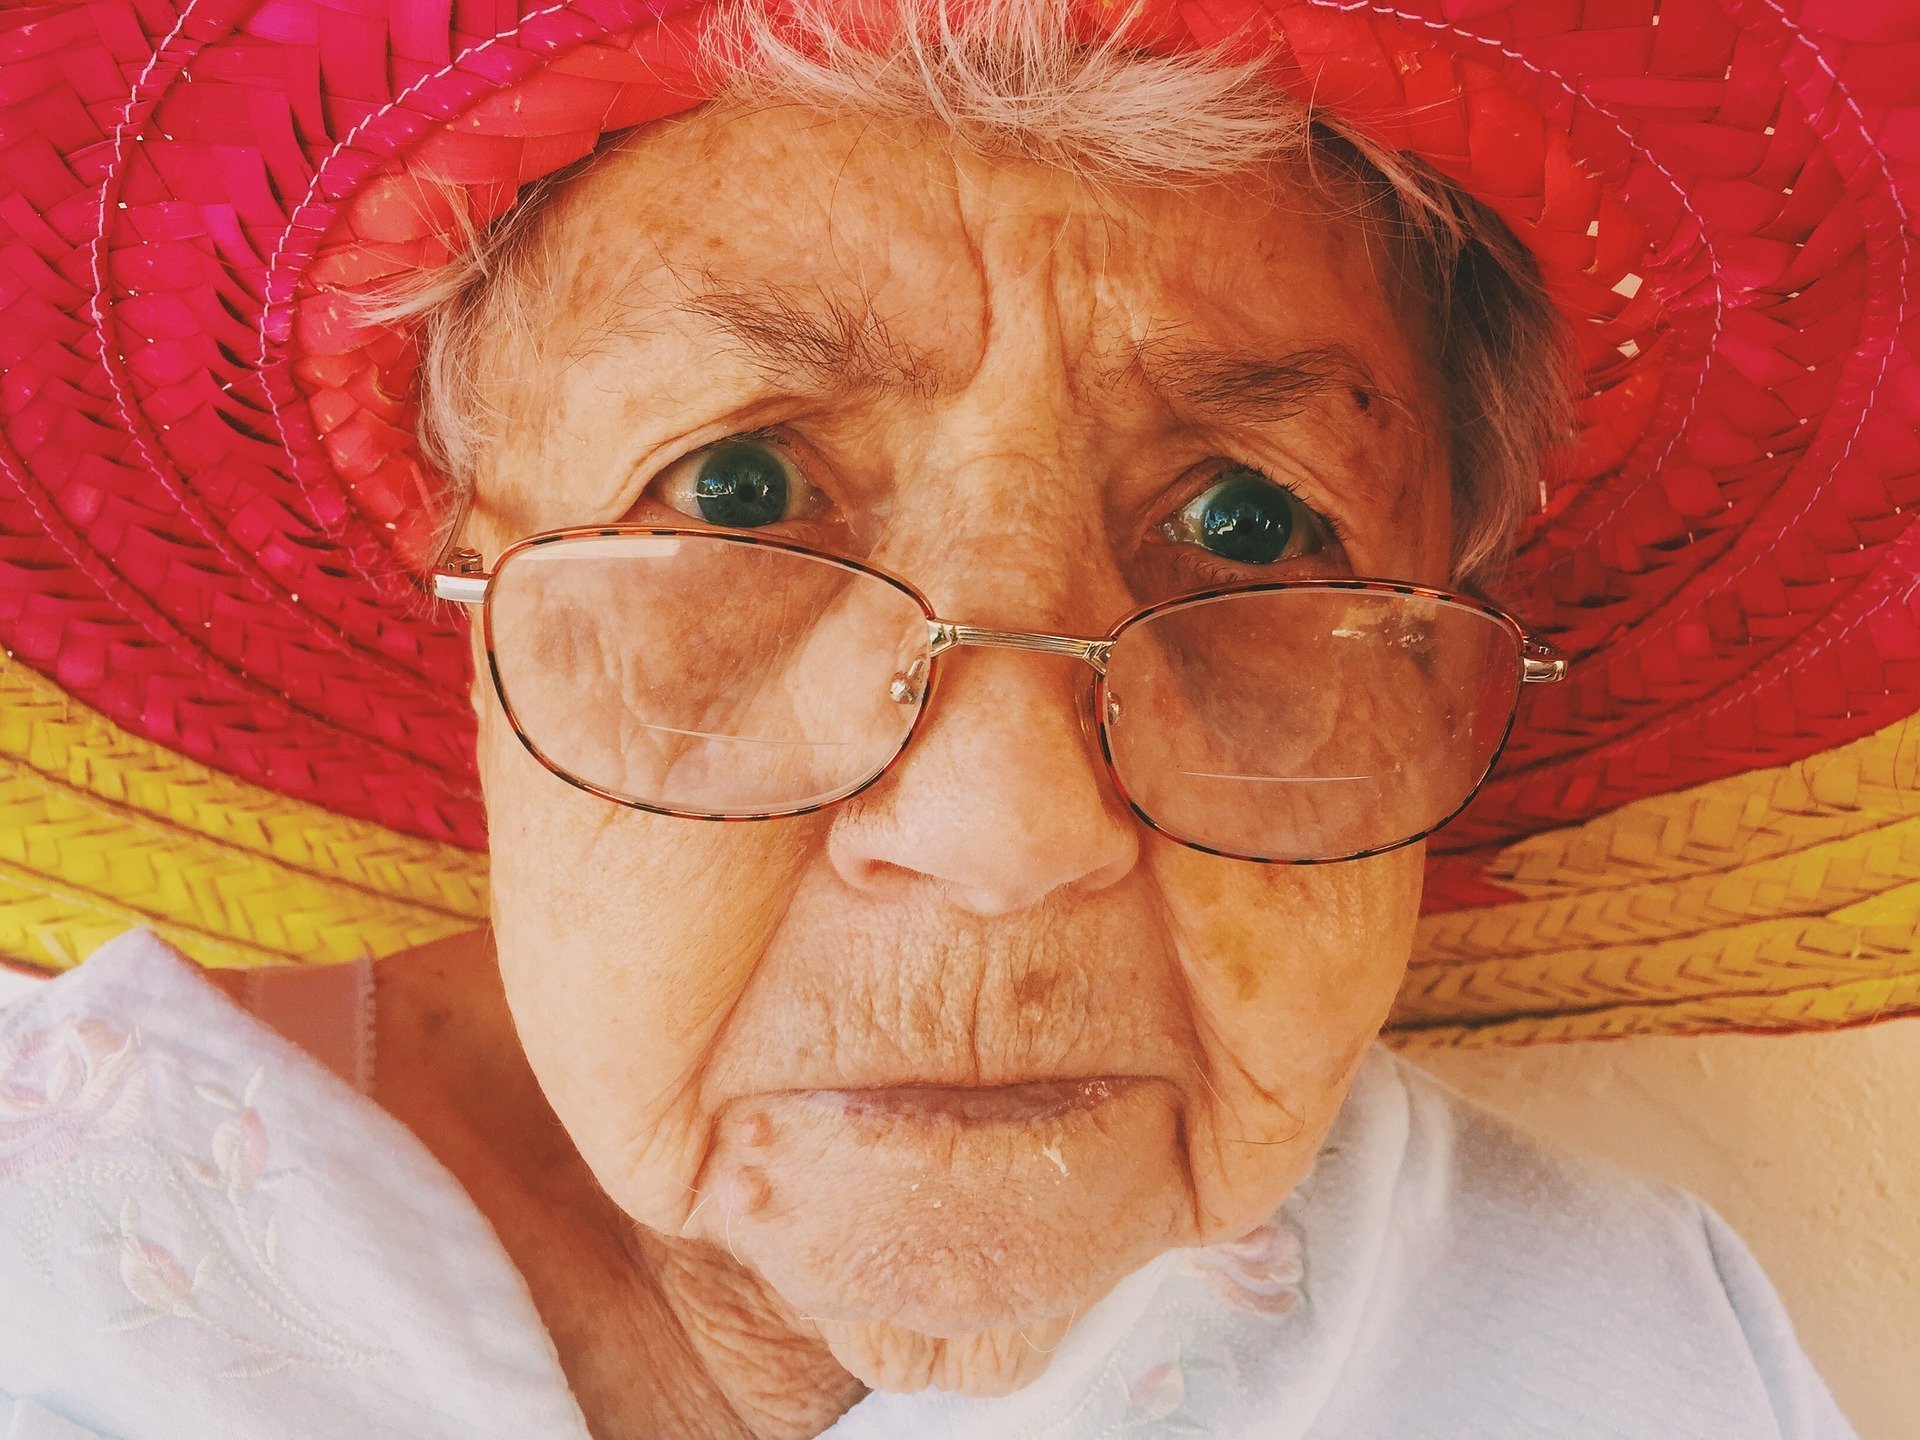 An old woman looking shocked while wearing a colorful hat and glasses | Photo: Pixabay